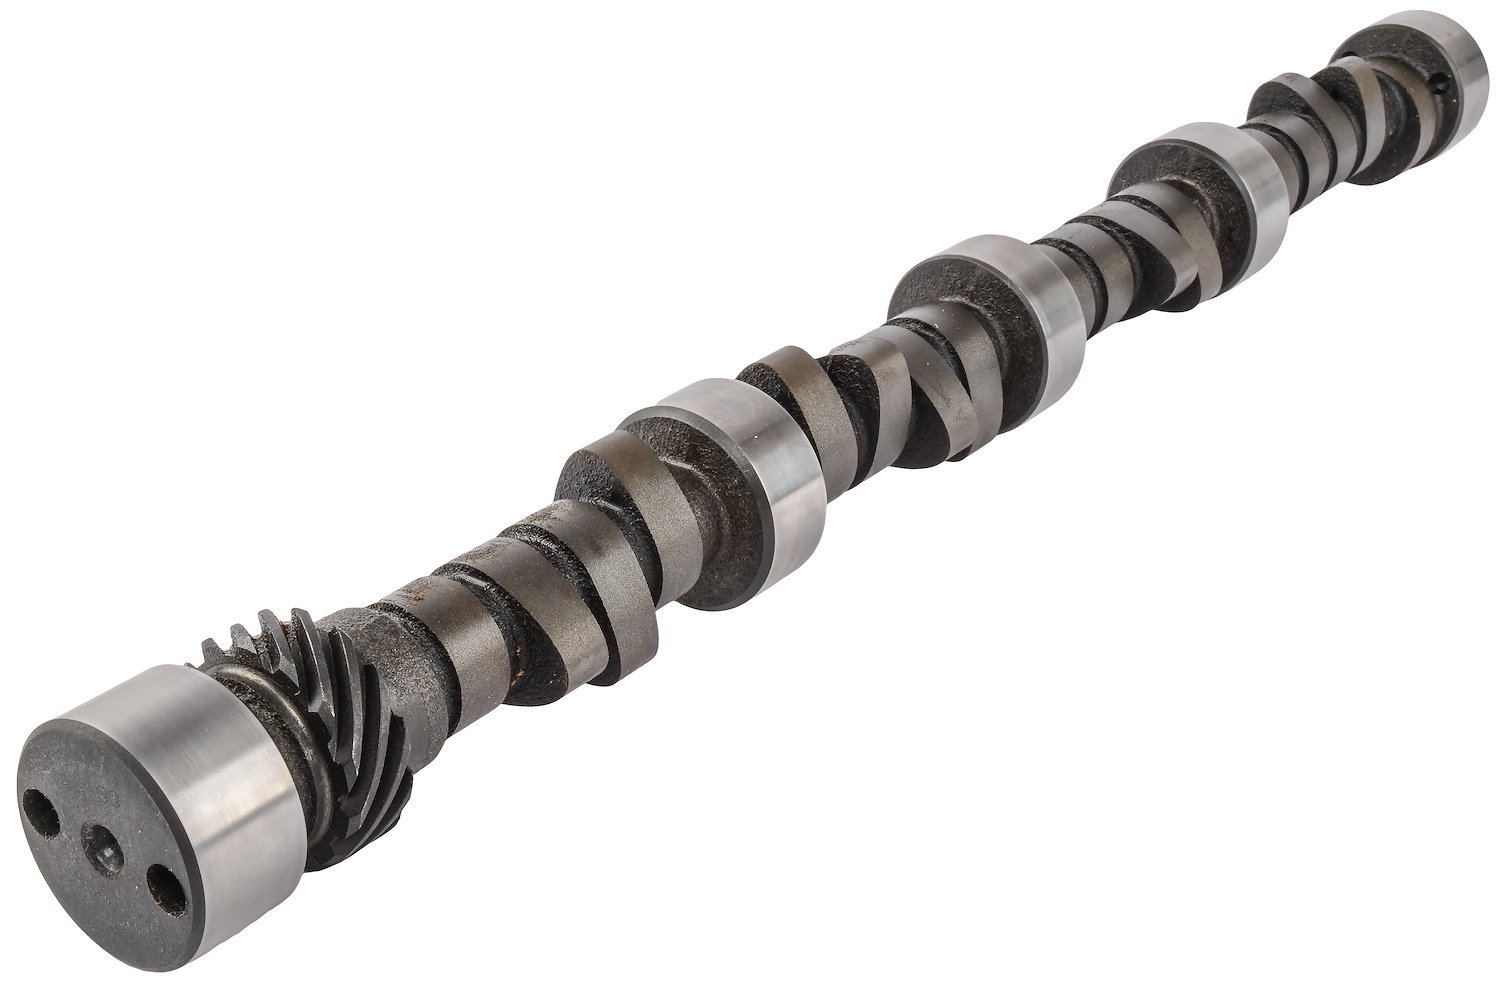 Hydraulic Flat Tappet Camshaft for 1957-1985 Chevy 262-400